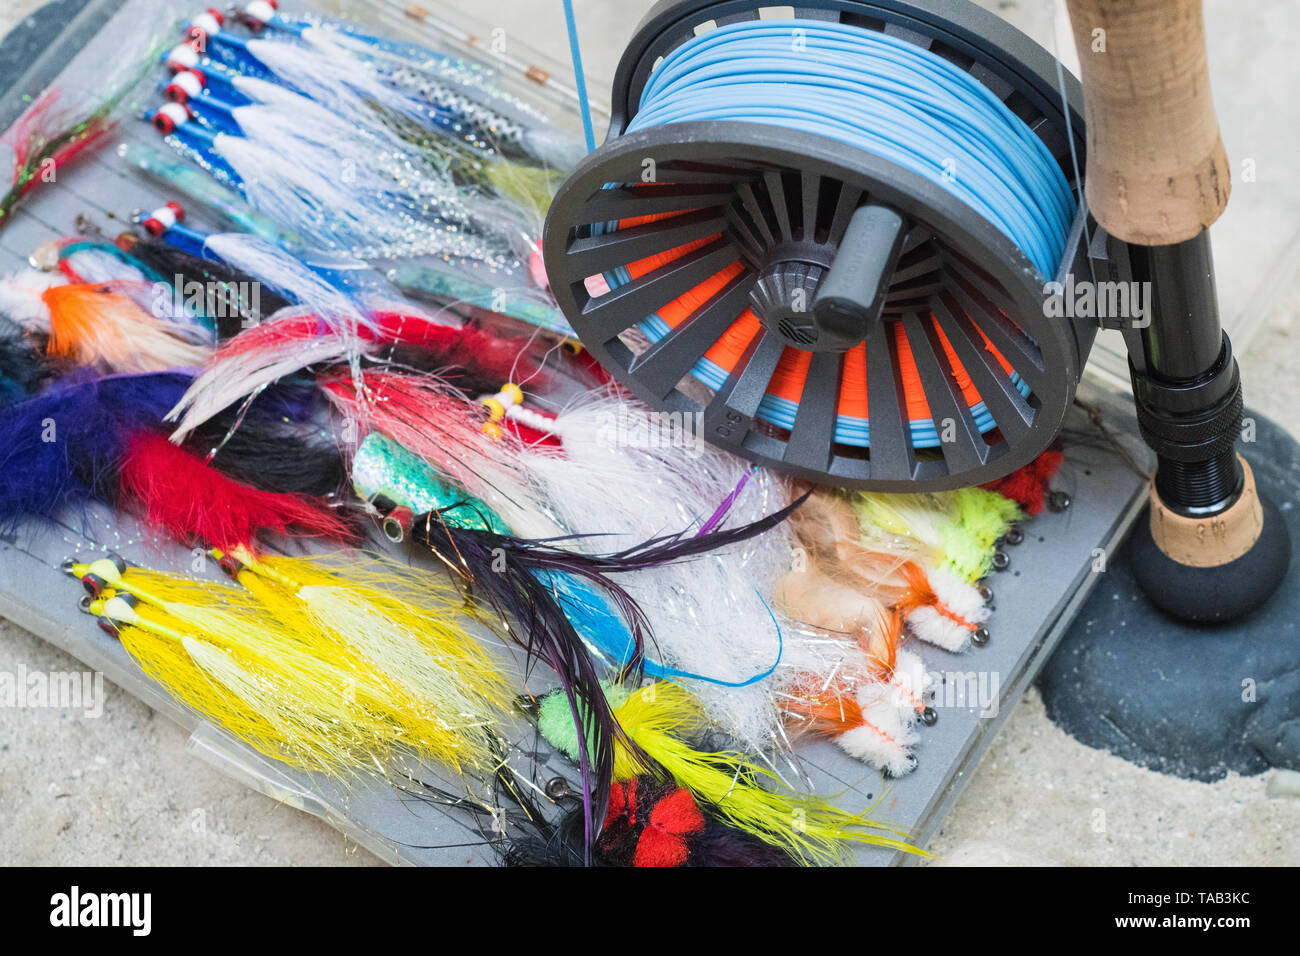 Saltwater fly fishing flies and fly rod and reel Stock Photo - Alamy